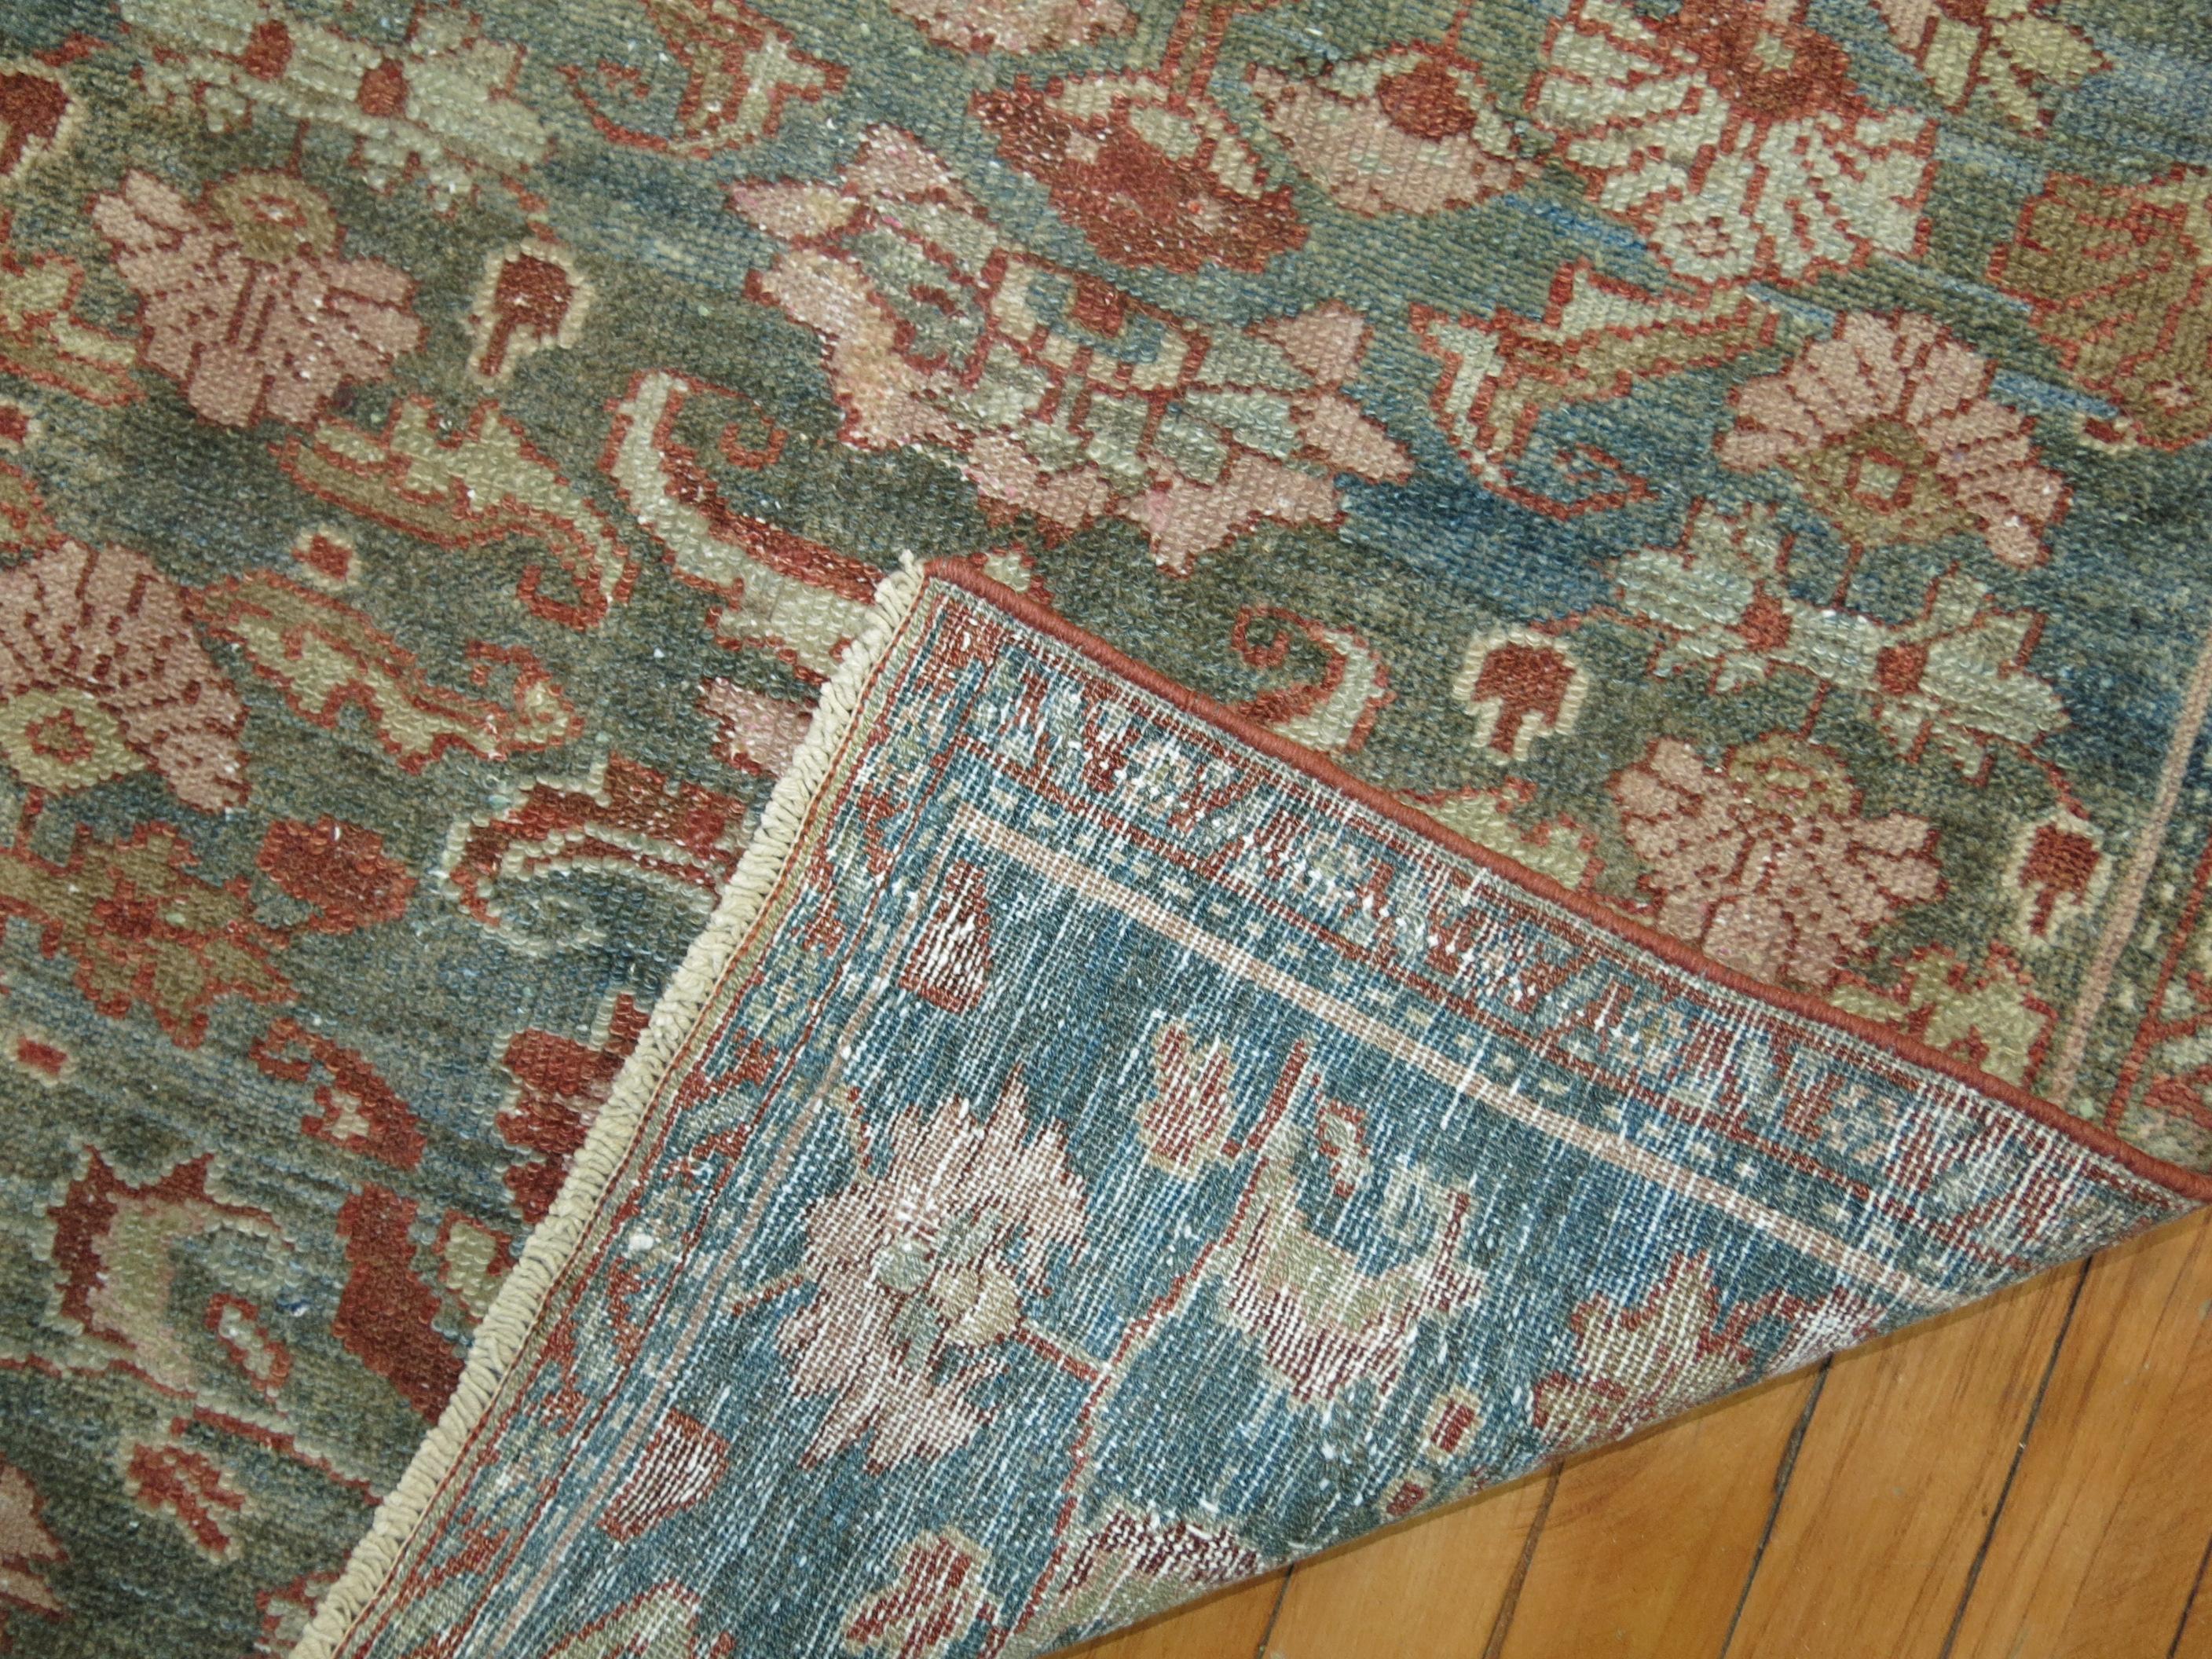 Predominant soft gray-blue-green Persian Malayer runner from the early 20th century. accents in brown and copper

Measures: 2'3